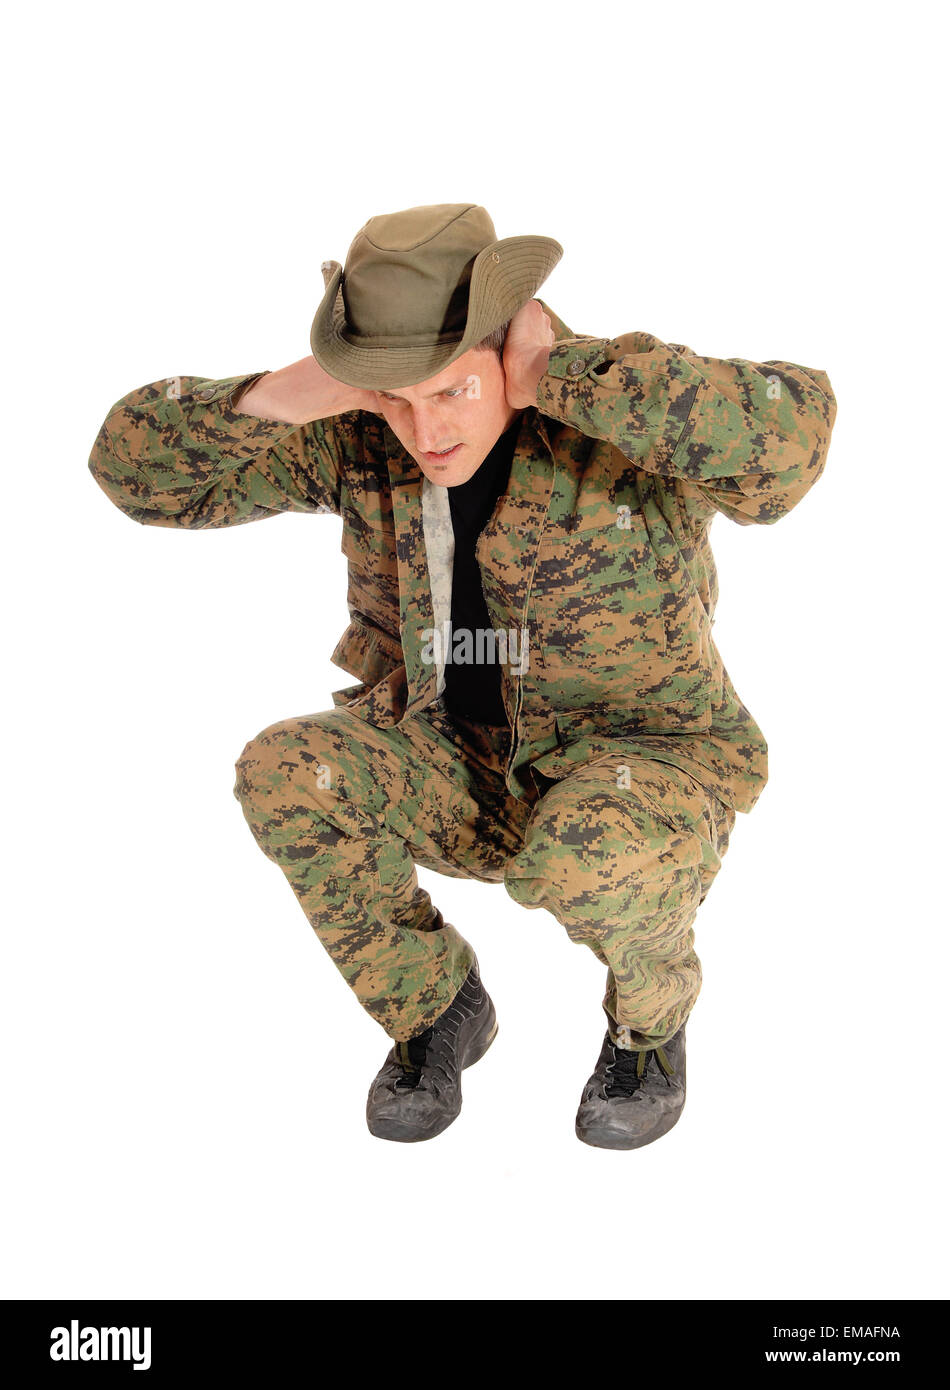 A soldier in camouflage uniform crouching on the floor in anticipation of an explosion, isolated for white background. Stock Photo